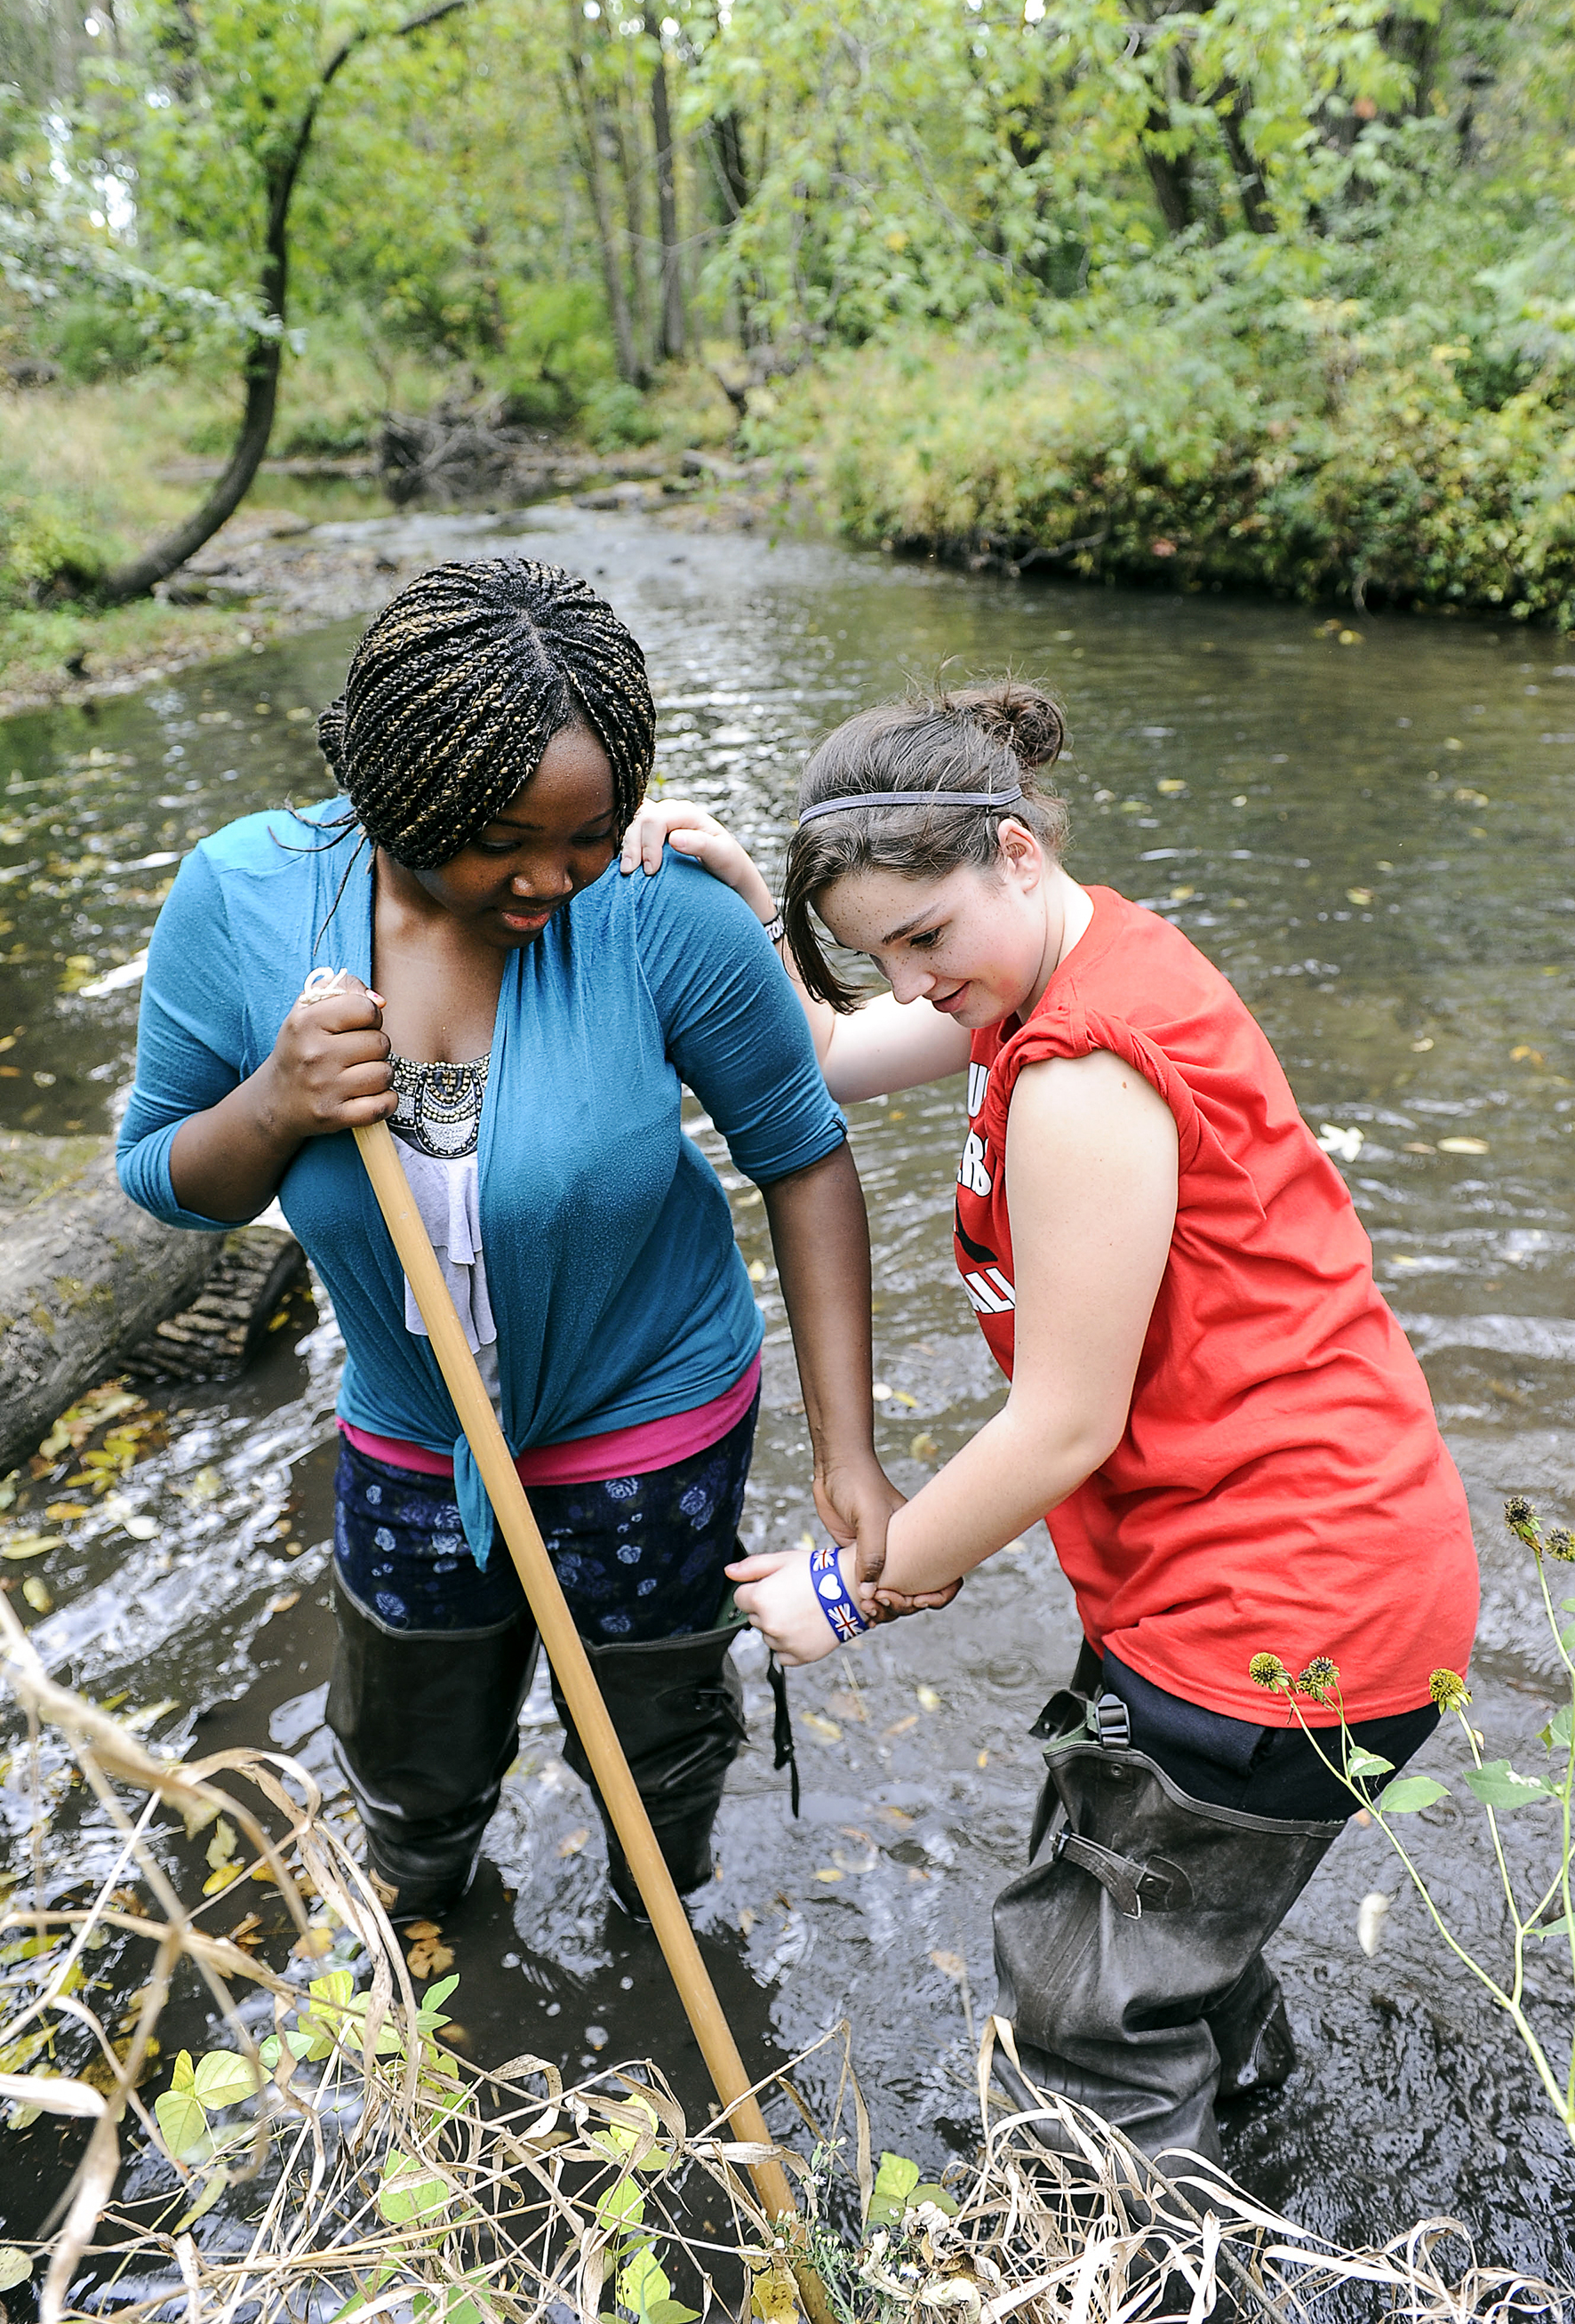 Mamafe Kromah holds a net as Lexi Shafer pokes around the bank of Dobbins Creek looking for critters during an Ellis seventh-grade all-day ecology field trip to the Jay C. Nature Center Friday afternoon. Eric Johnson/photodesk@austindailyherald.com